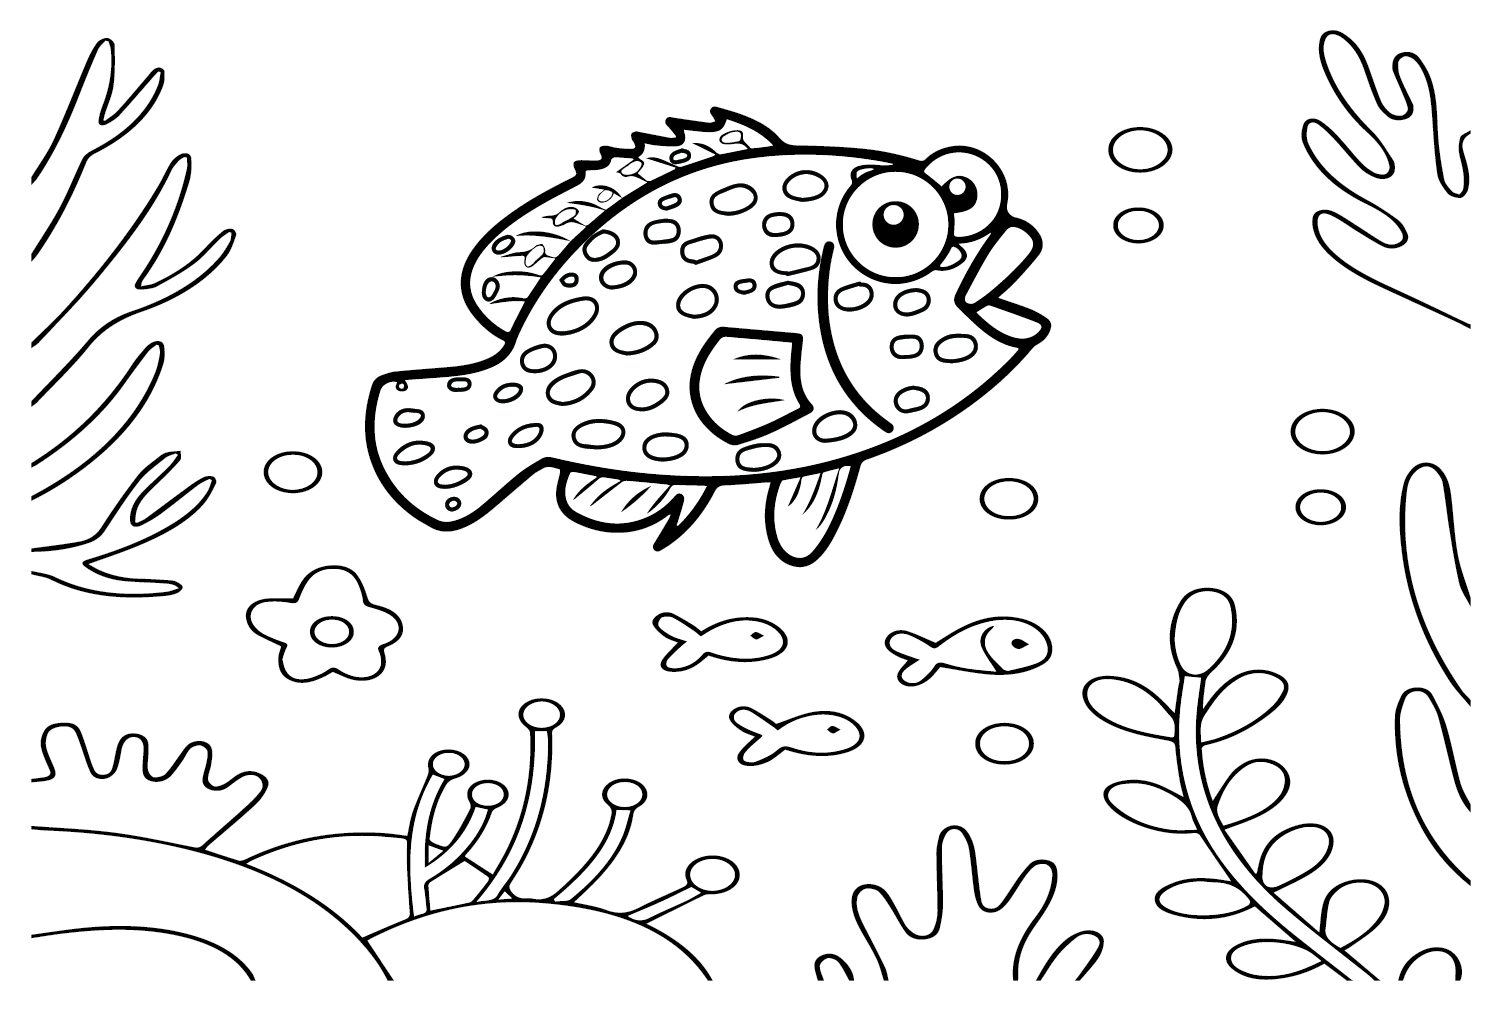 Grouper Chibi from Grouper